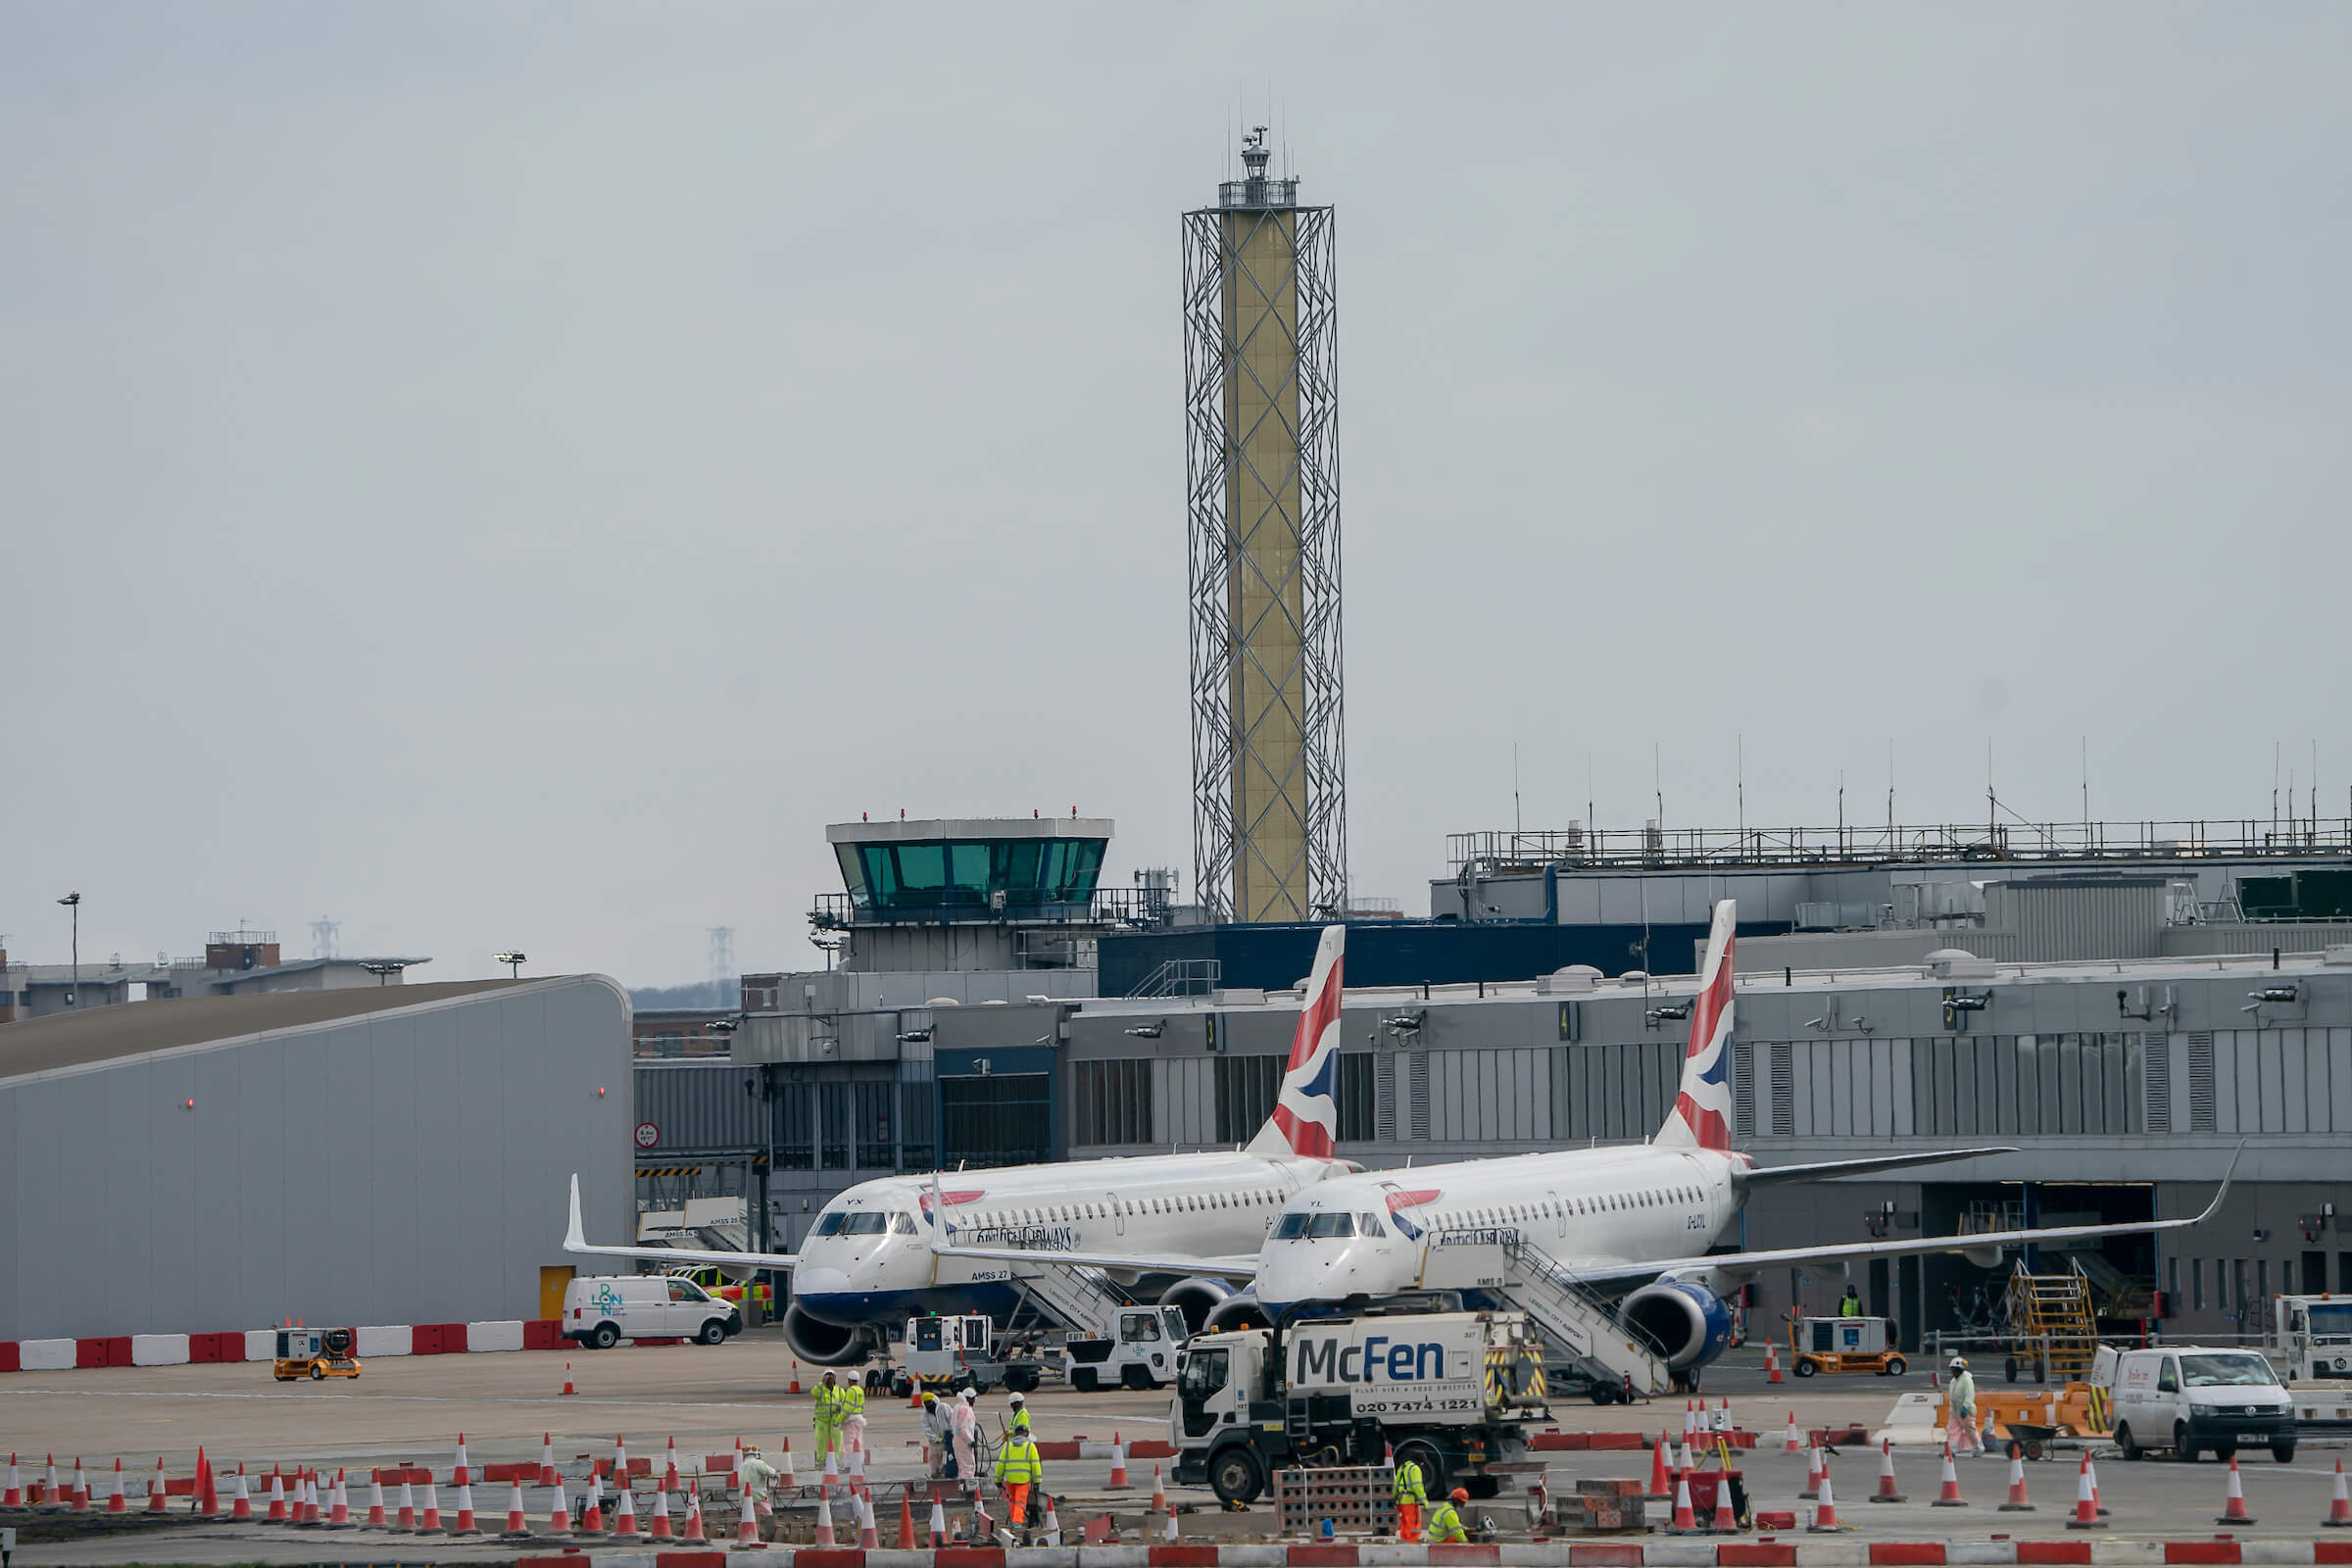 London City Airport introduces remote ATC tower